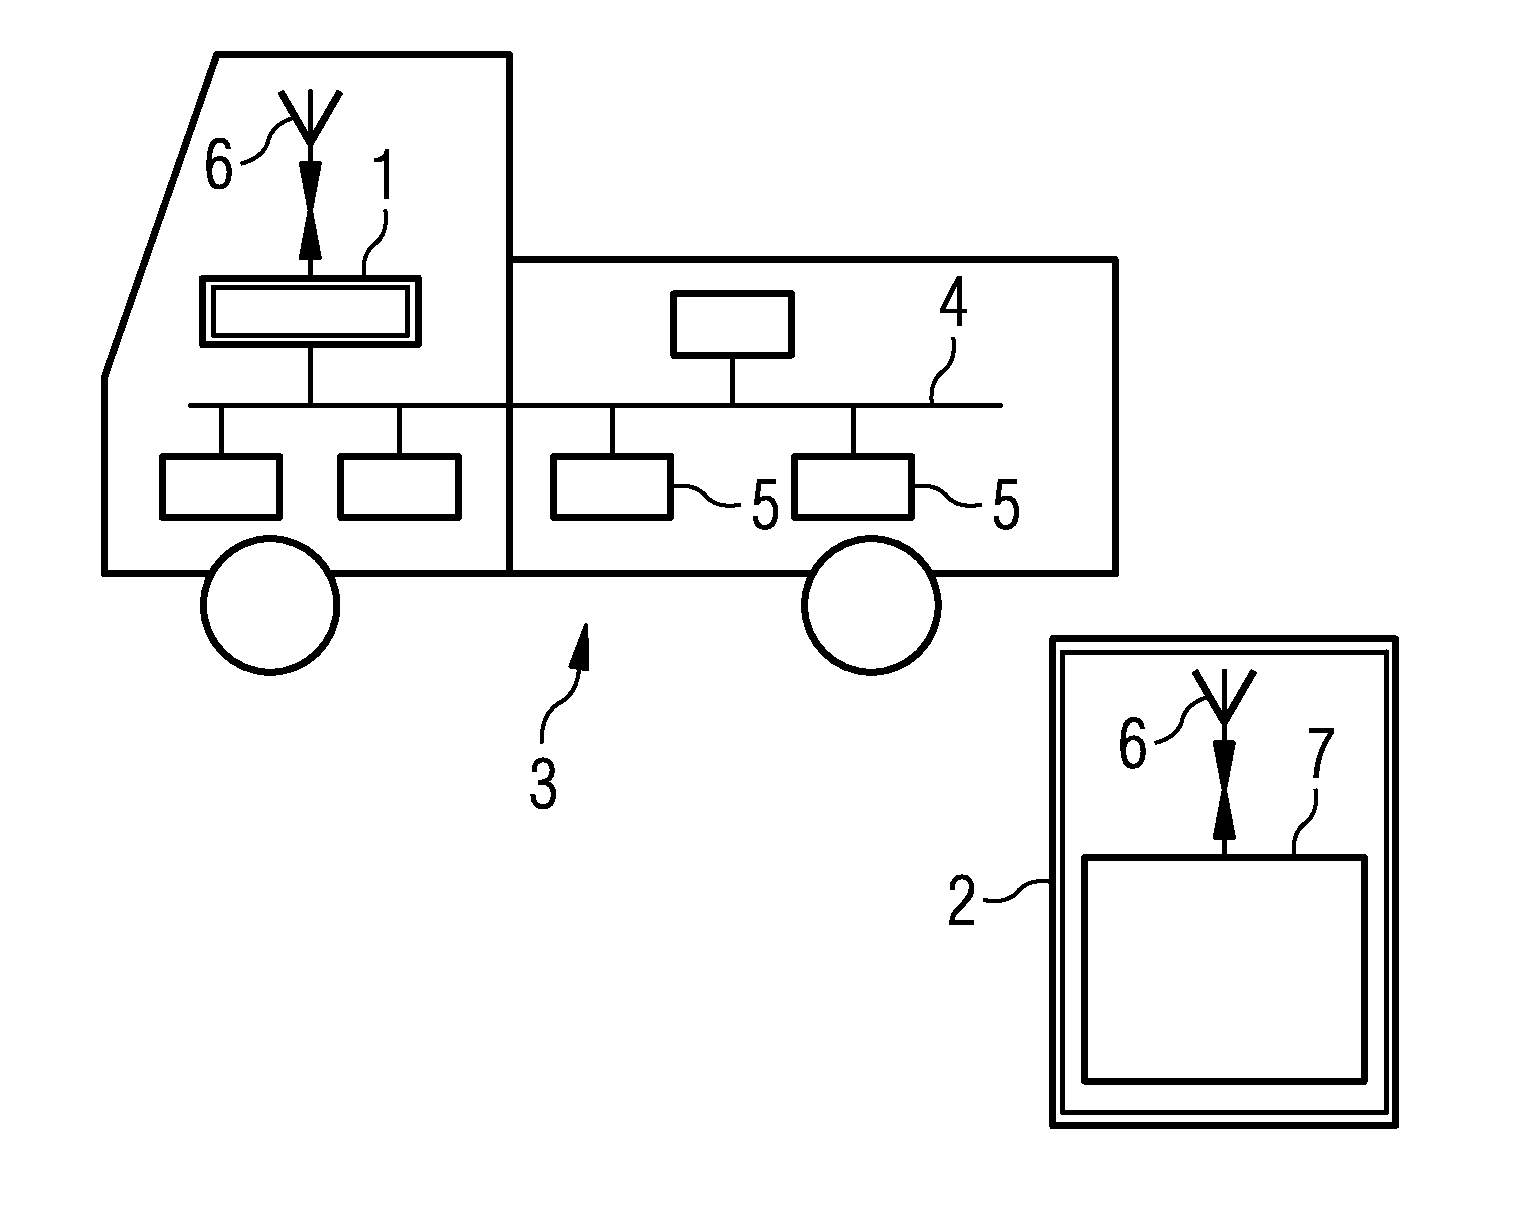 Mobile interface and system for controlling vehicle functions